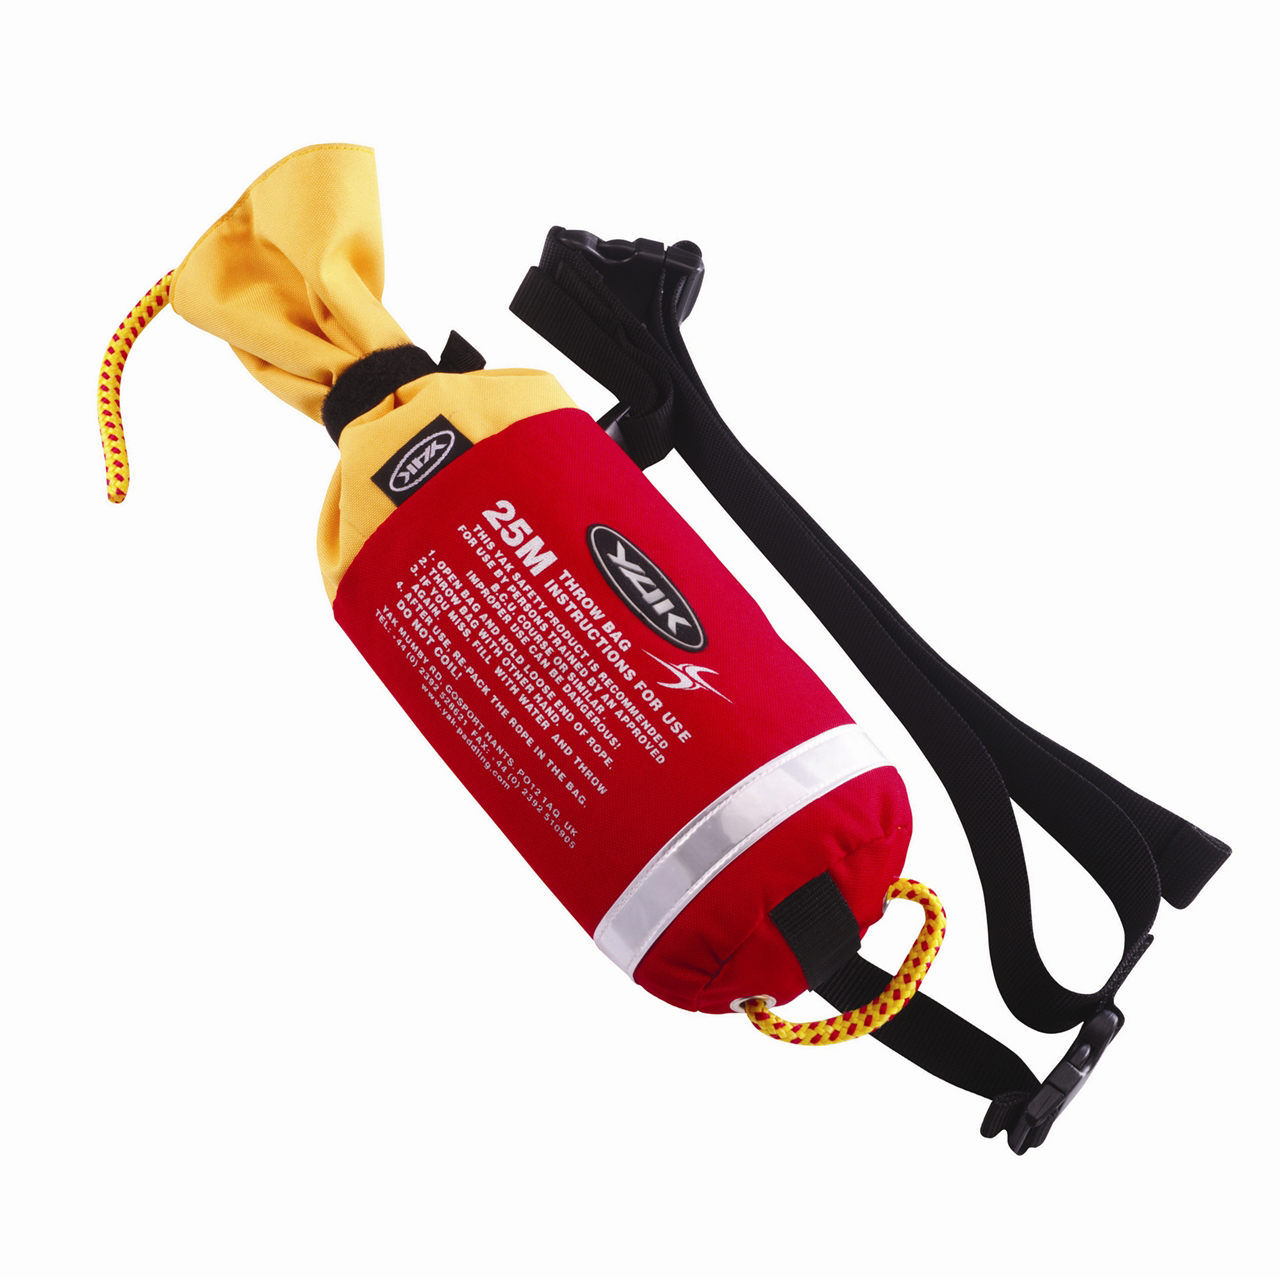 Yak Equipment - Rescue Throw Bag - 15m, 20m and 25m